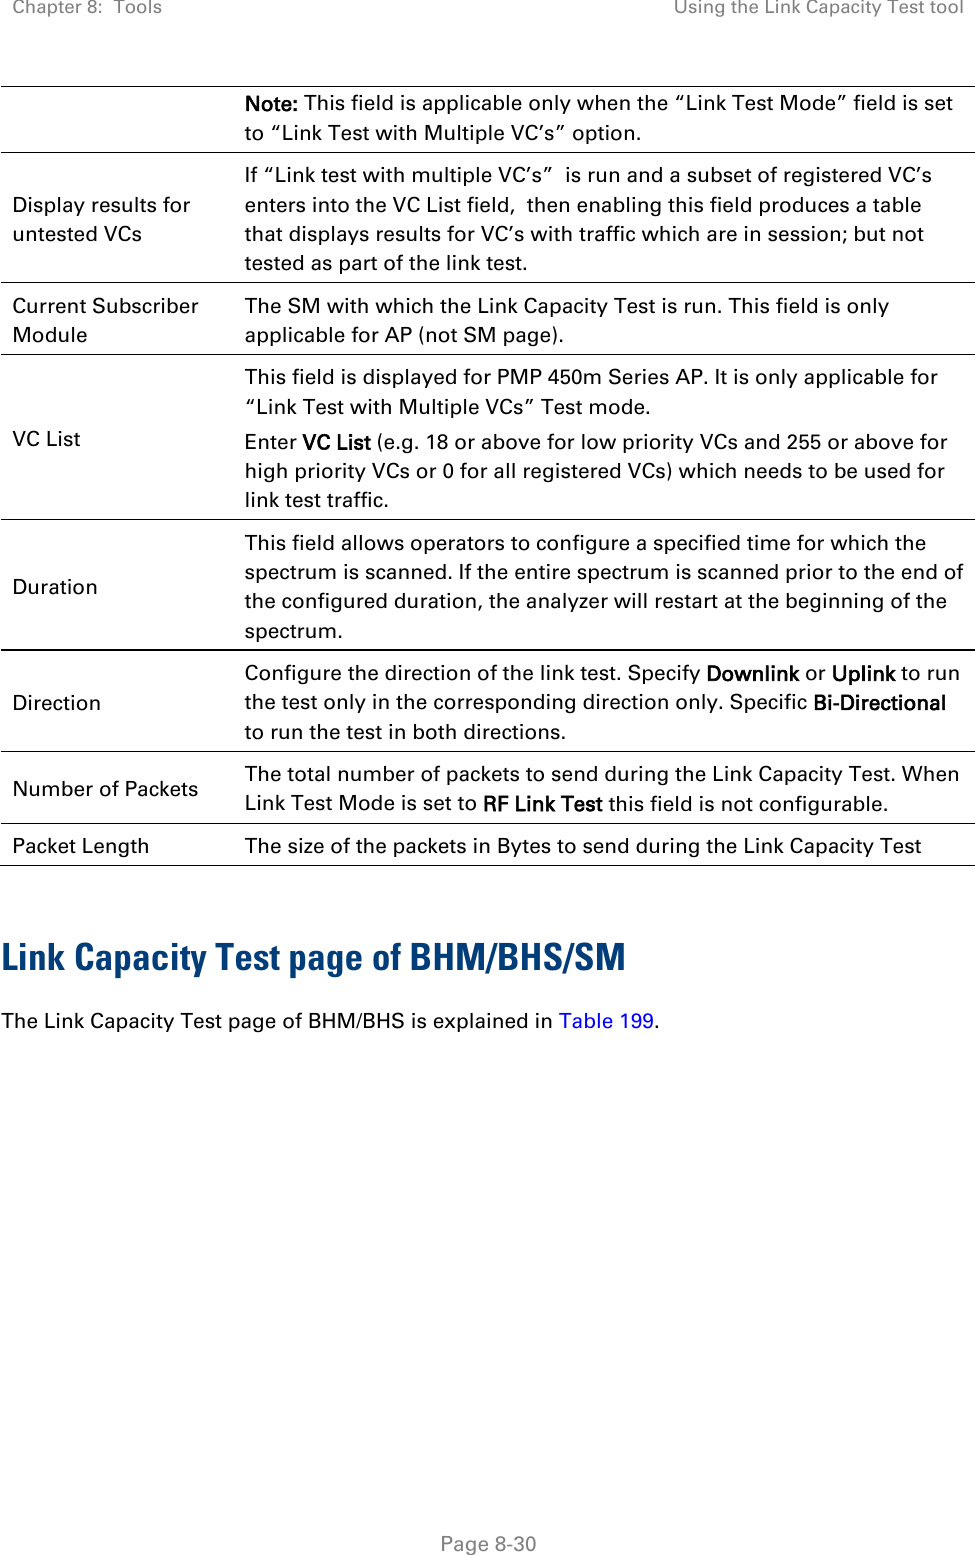 Chapter 8:  Tools Using the Link Capacity Test tool   Page 8-30 Note: This field is applicable only when the “Link Test Mode” field is set to “Link Test with Multiple VC’s” option. Display results for untested VCs If “Link test with multiple VC’s”  is run and a subset of registered VC’s enters into the VC List field,  then enabling this field produces a table that displays results for VC’s with traffic which are in session; but not tested as part of the link test. Current Subscriber Module The SM with which the Link Capacity Test is run. This field is only applicable for AP (not SM page). VC List This field is displayed for PMP 450m Series AP. It is only applicable for “Link Test with Multiple VCs” Test mode. Enter VC List (e.g. 18 or above for low priority VCs and 255 or above for high priority VCs or 0 for all registered VCs) which needs to be used for link test traffic. Duration This field allows operators to configure a specified time for which the spectrum is scanned. If the entire spectrum is scanned prior to the end of the configured duration, the analyzer will restart at the beginning of the spectrum. Direction Configure the direction of the link test. Specify Downlink or Uplink to run the test only in the corresponding direction only. Specific Bi-Directional to run the test in both directions. Number of Packets The total number of packets to send during the Link Capacity Test. When Link Test Mode is set to RF Link Test this field is not configurable. Packet Length The size of the packets in Bytes to send during the Link Capacity Test  Link Capacity Test page of BHM/BHS/SM The Link Capacity Test page of BHM/BHS is explained in Table 199. 